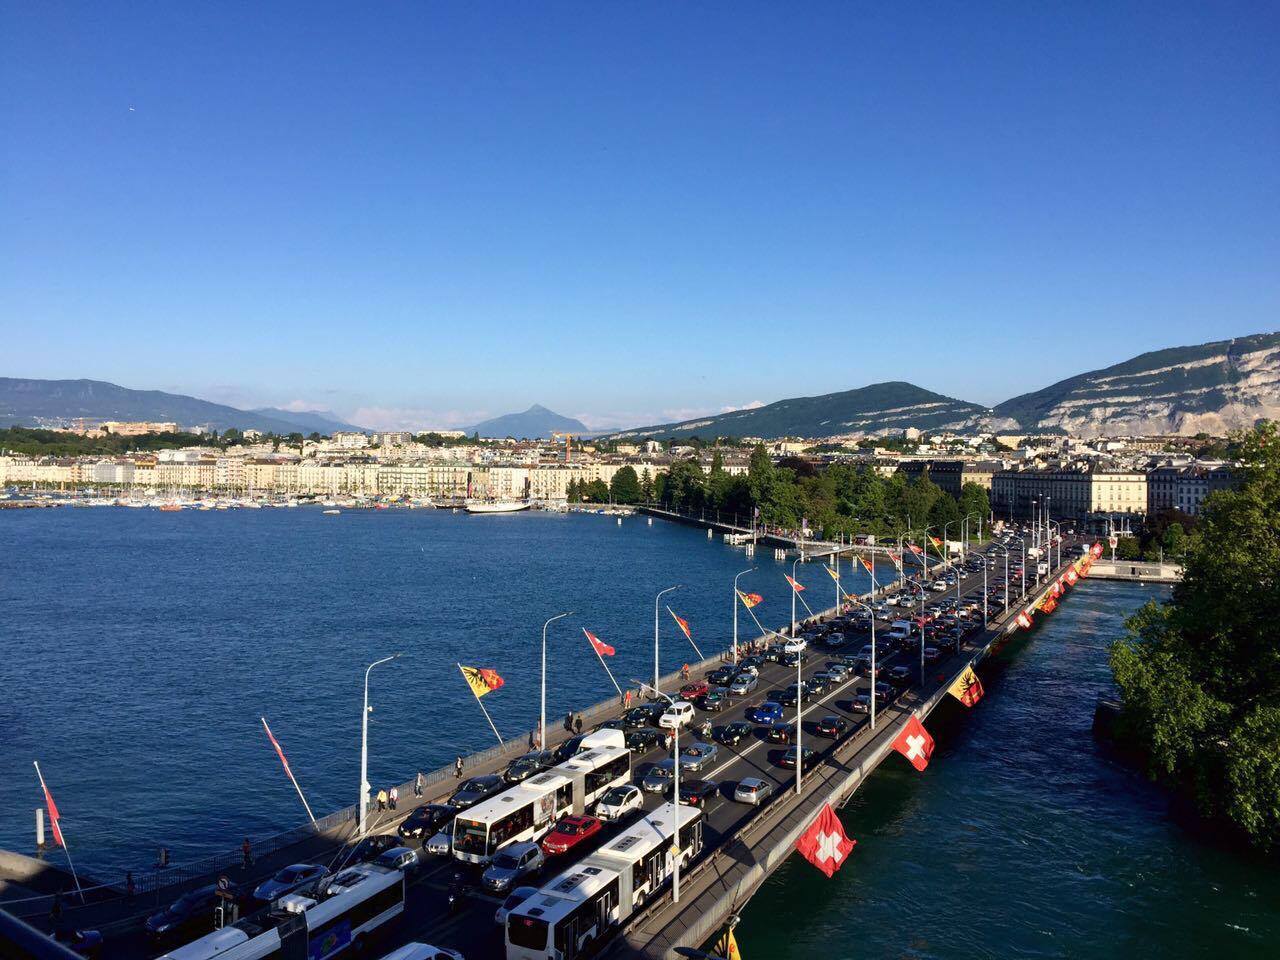  The  Pont du Mont-Blanc  (Mont Blanc Bridge) traverses the lake and connects two sides of the city. Its lined with alternating flags of Geneva and Switzerland, which are sometimes substituted for alternative flags during important events or festival